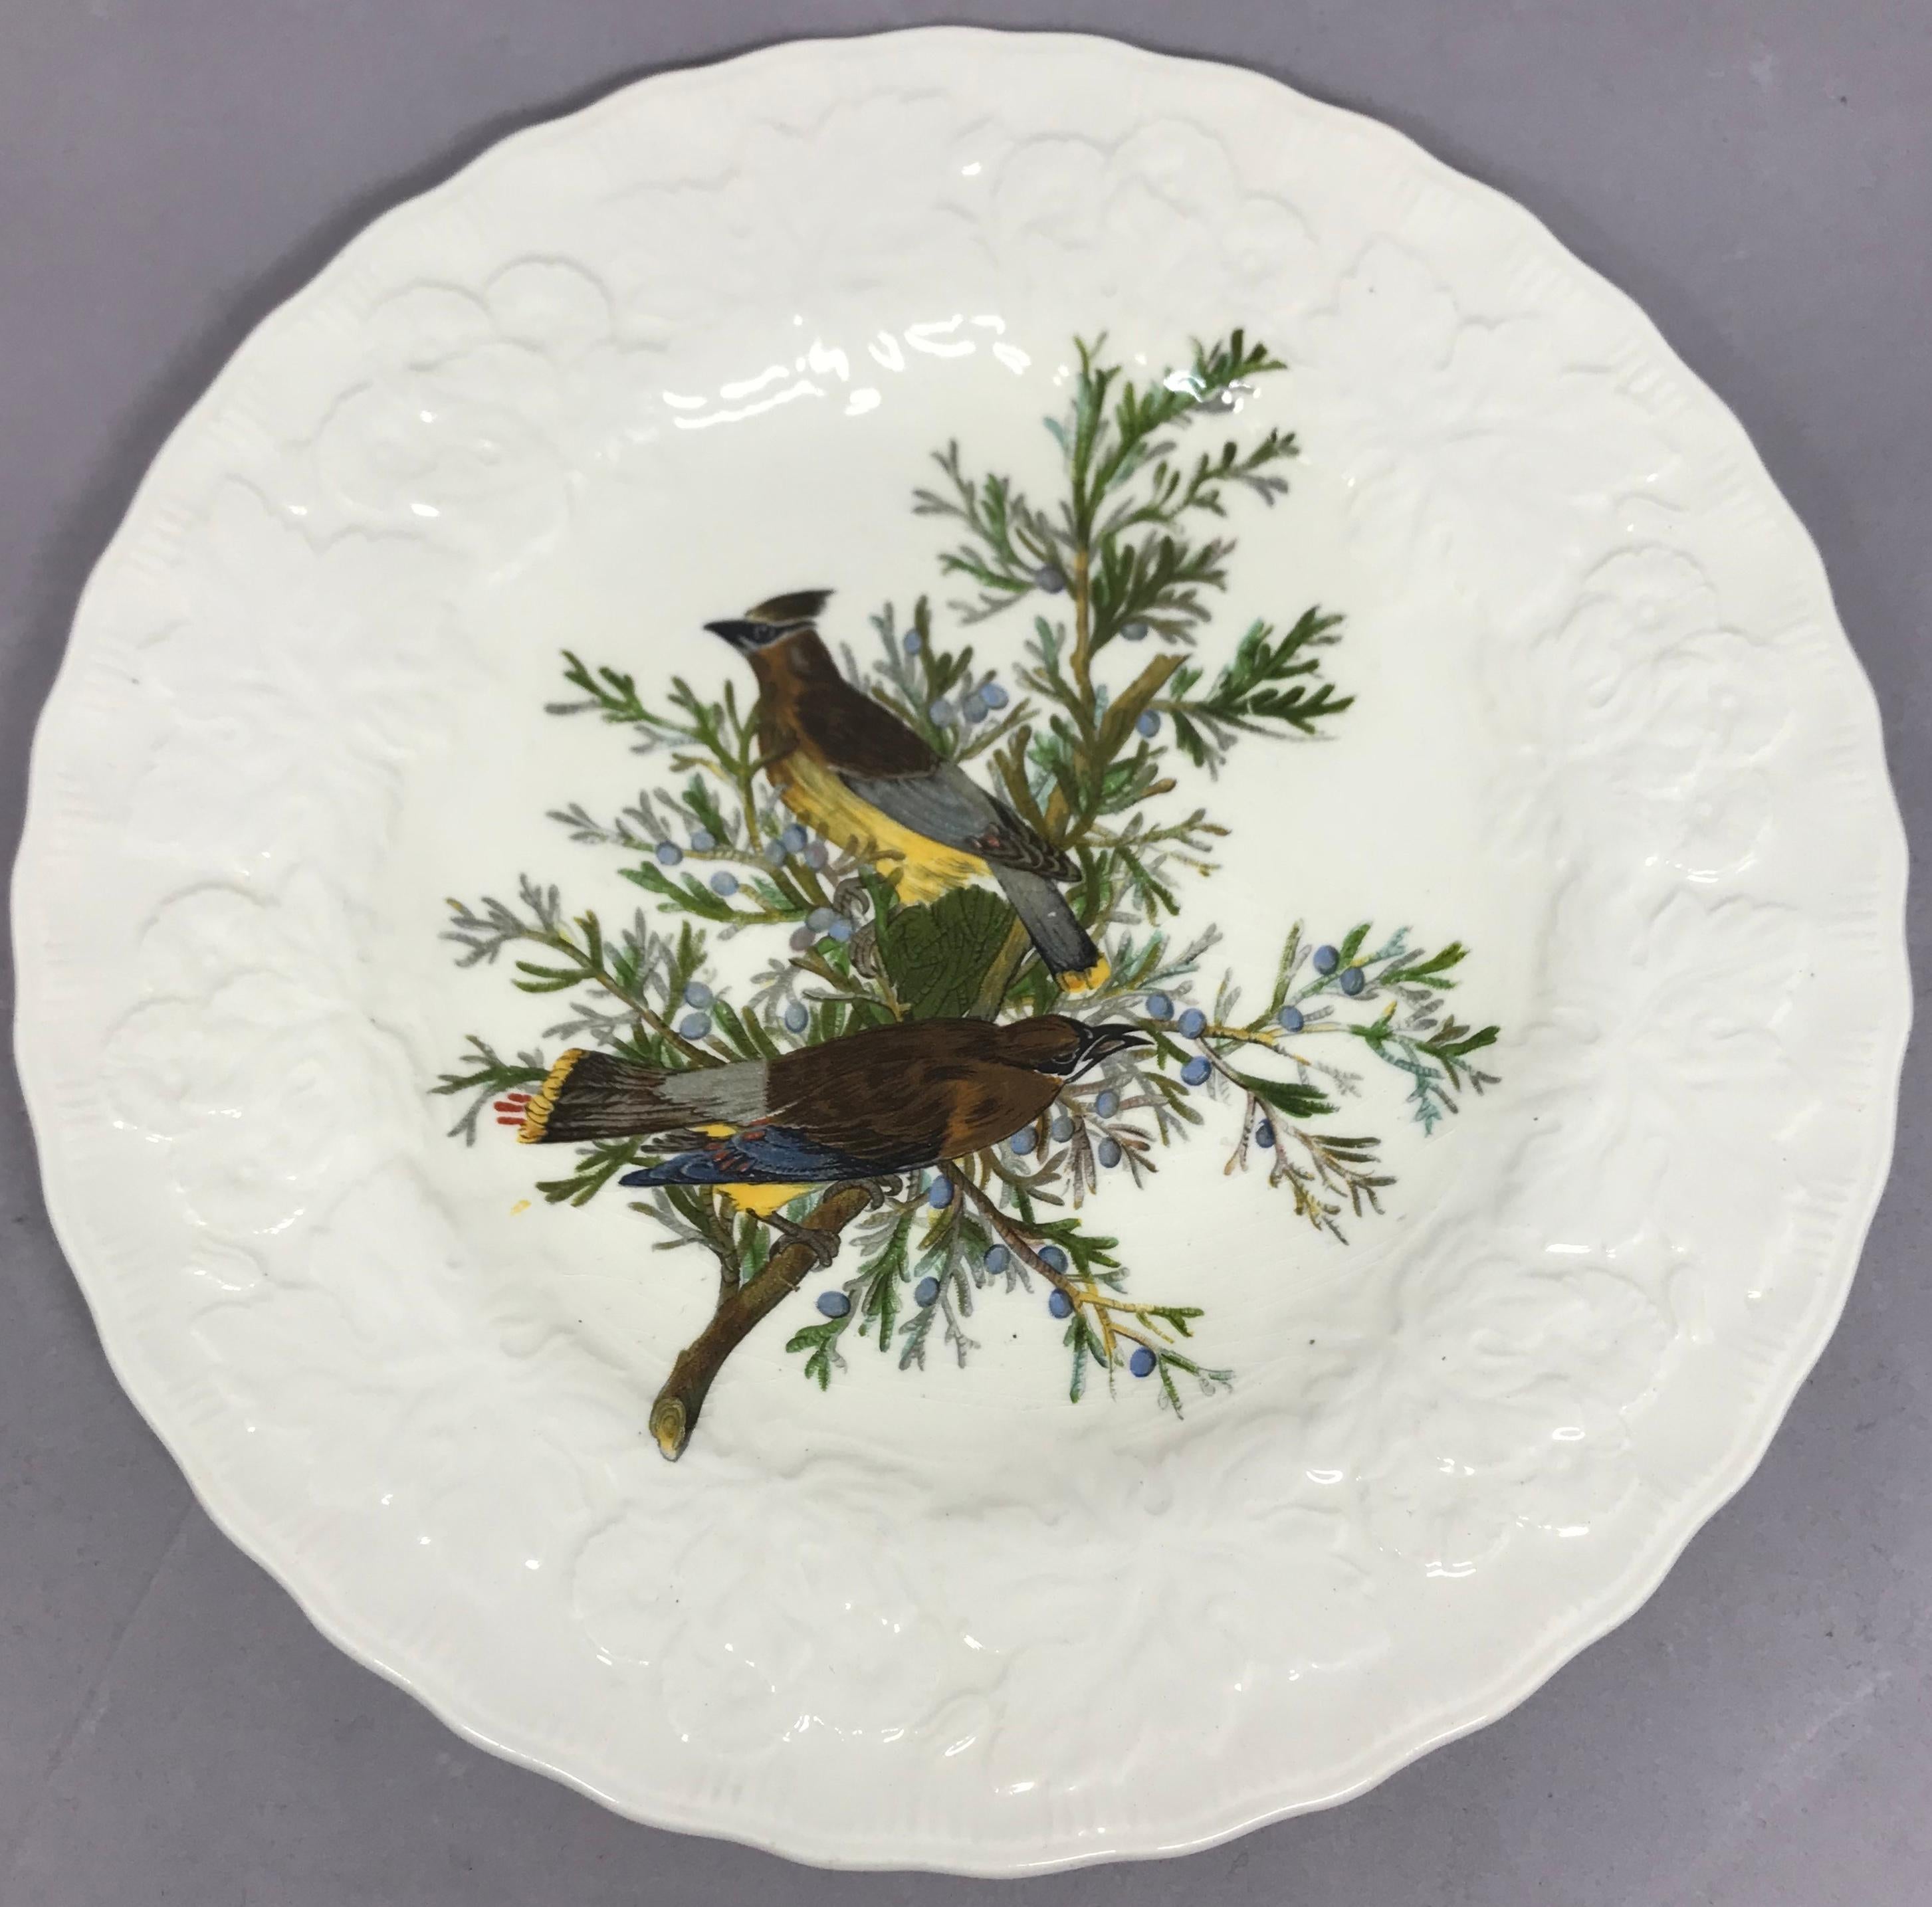 Set of eight Audubon birds of America plates in cream with raised floral border centering on eight different birds. Alfred Meakin, England, circa 1940.
One cedar bird #43
One band tailed pigeon #62
One white crowned sparrow #114
One fork tailed